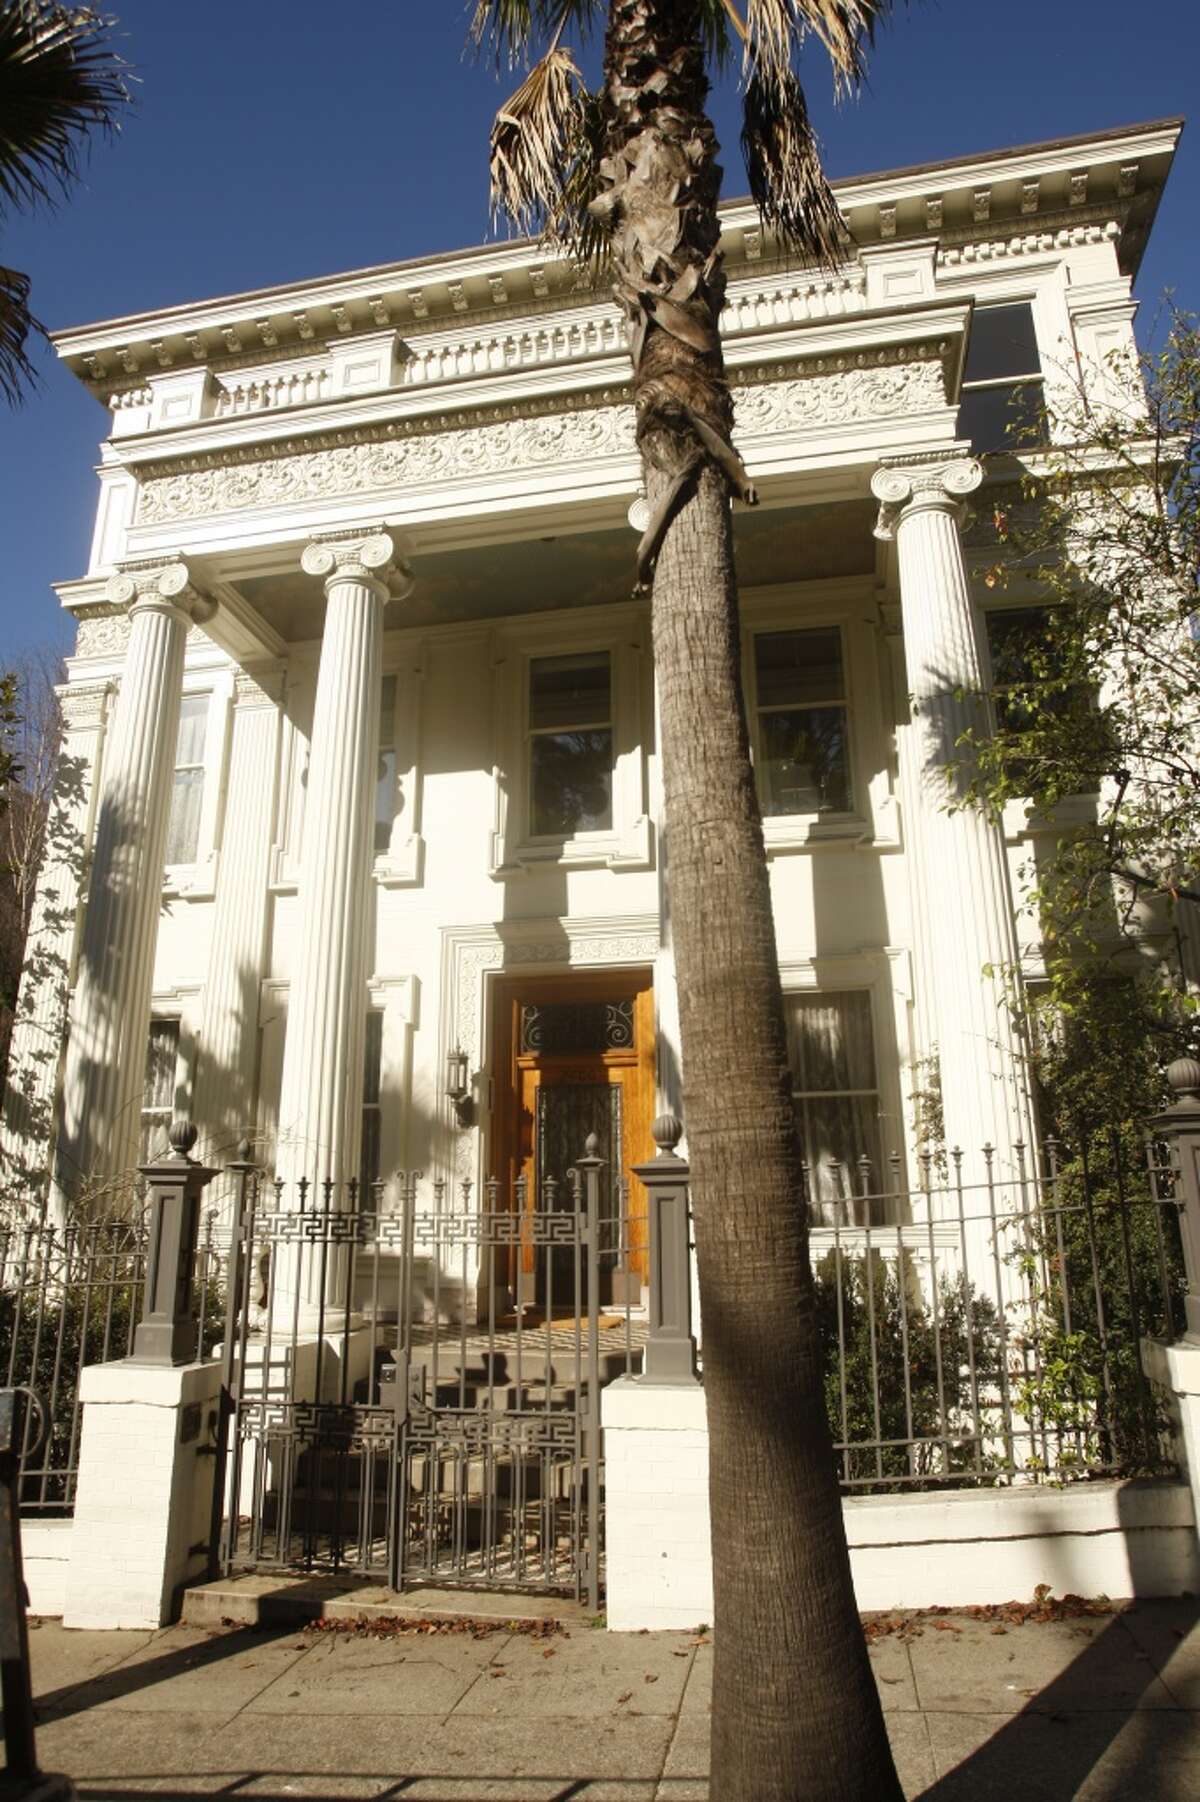 Jefferson Airplane house, 2400 Fulton St. 'The Mansion' was ground zero for S.F. rock parties and the group named their 1987 greatest hits album after the address.